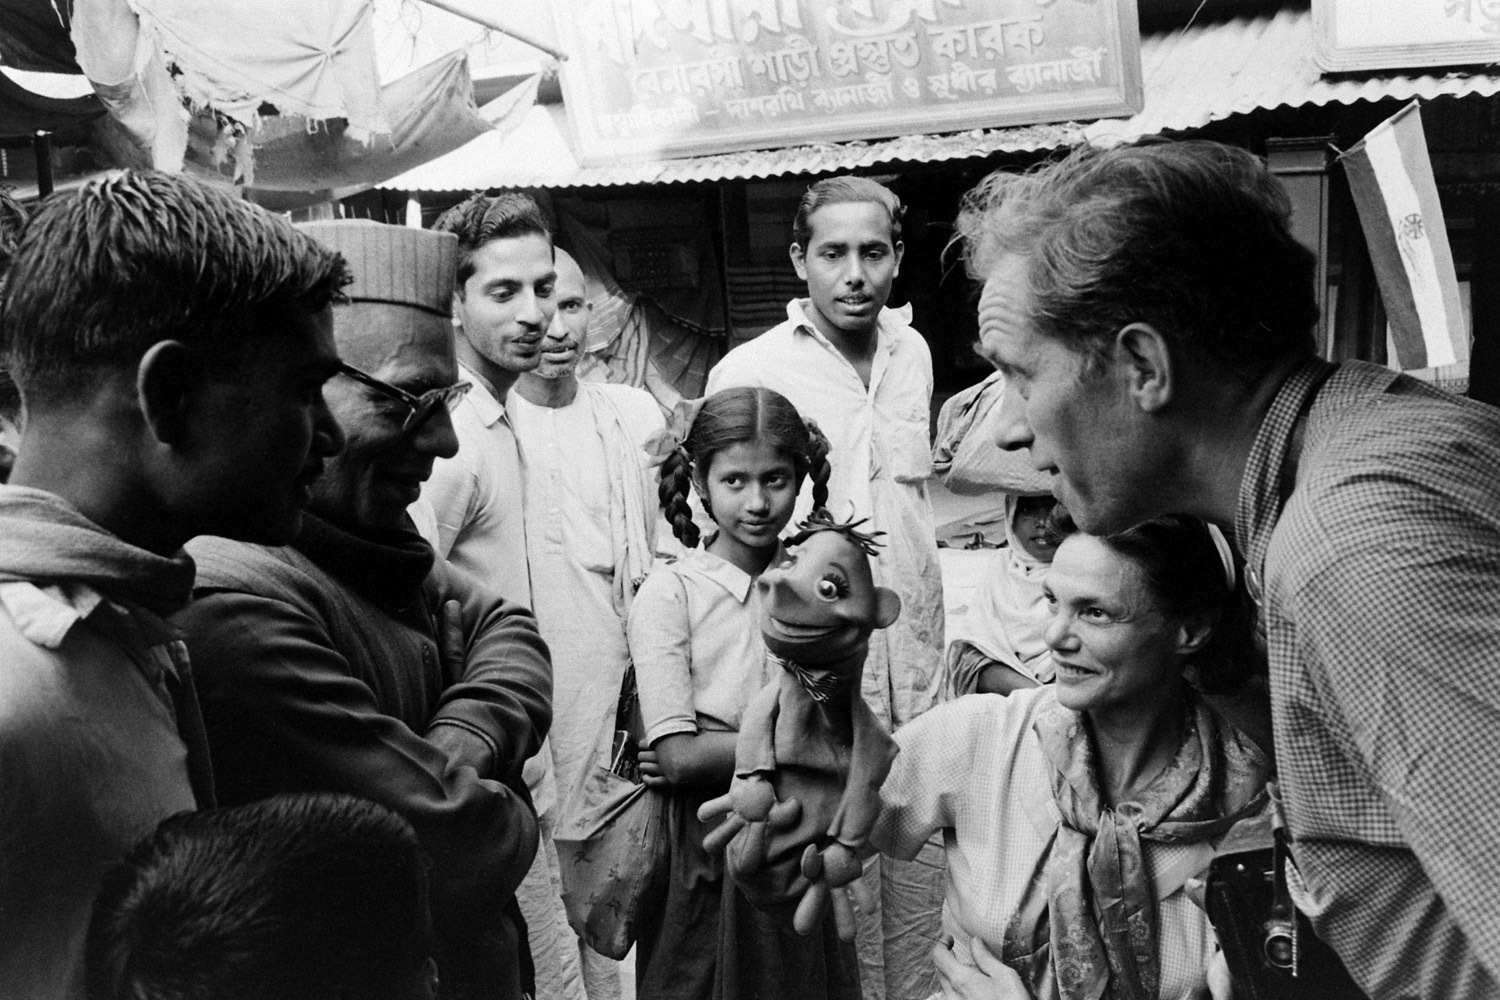 American puppeteers Bil and Cora Baird in India in 1962.